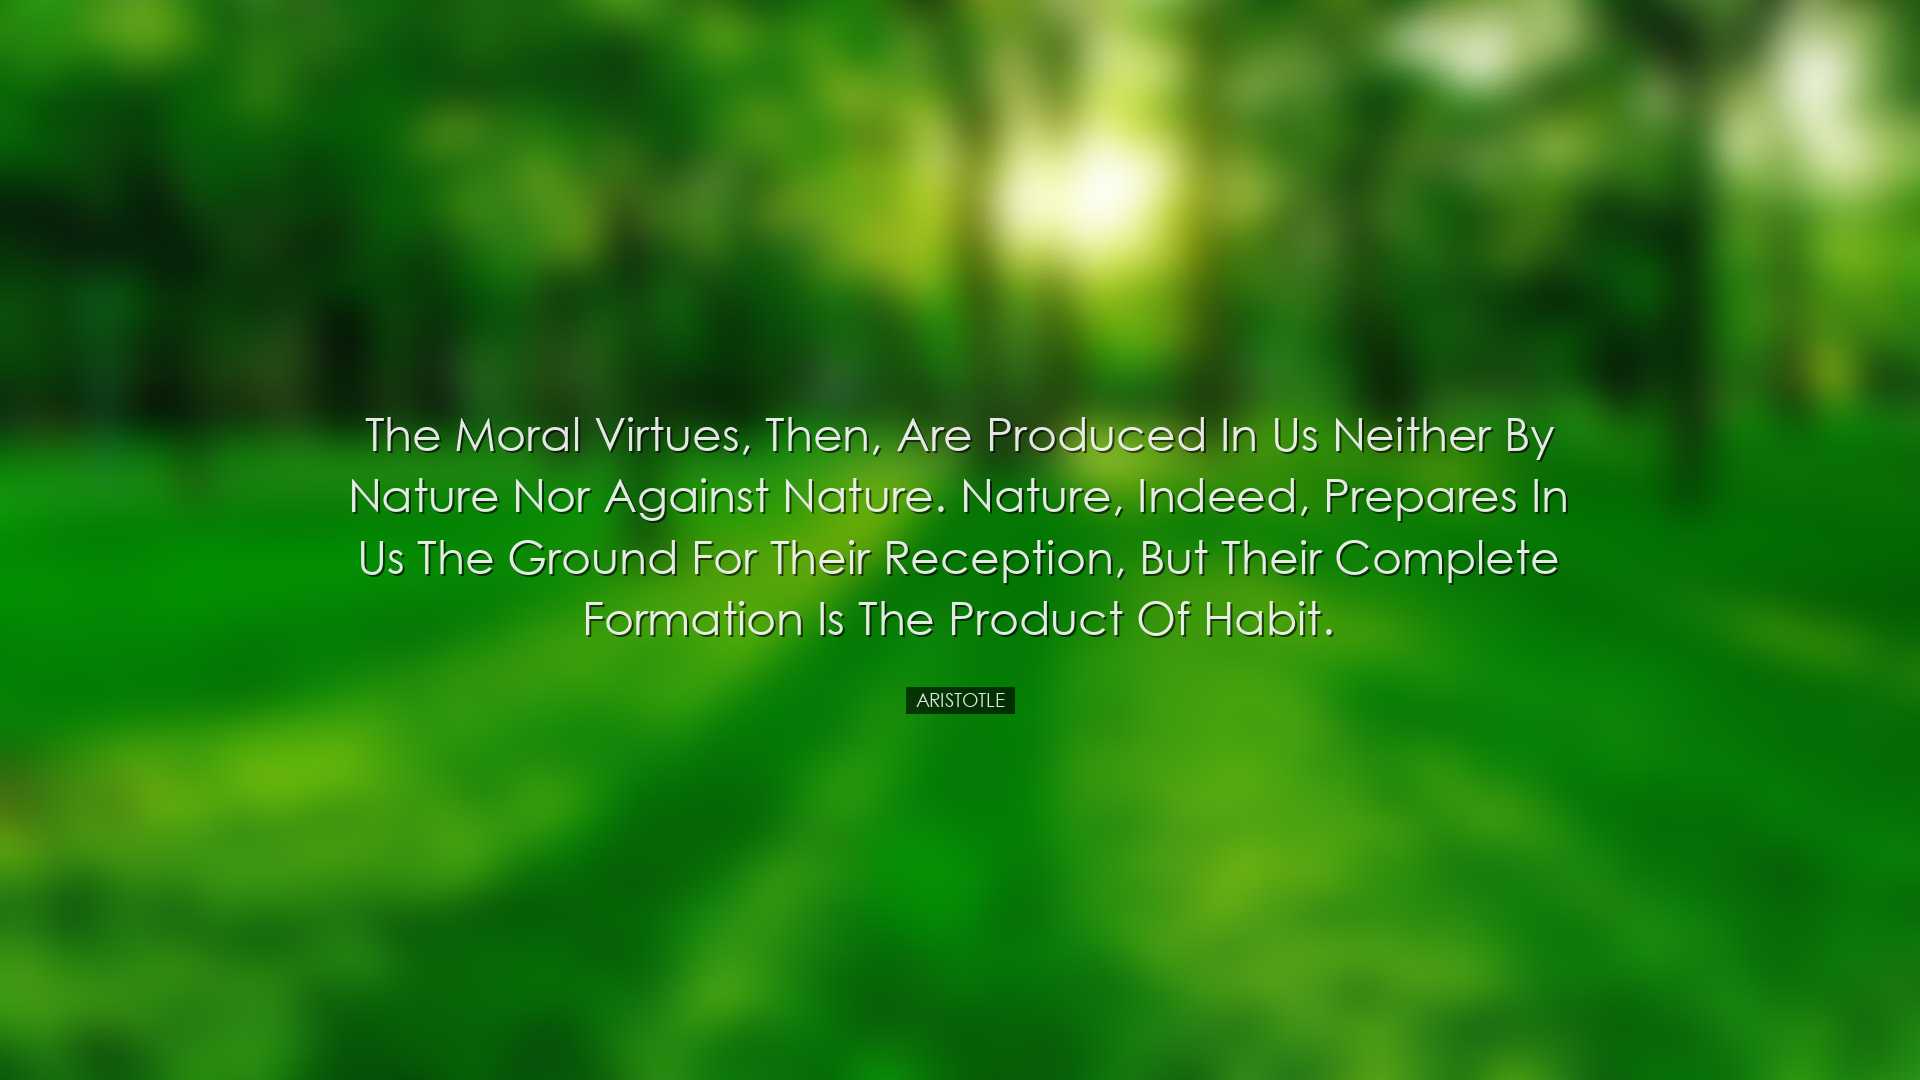 The moral virtues, then, are produced in us neither by nature nor